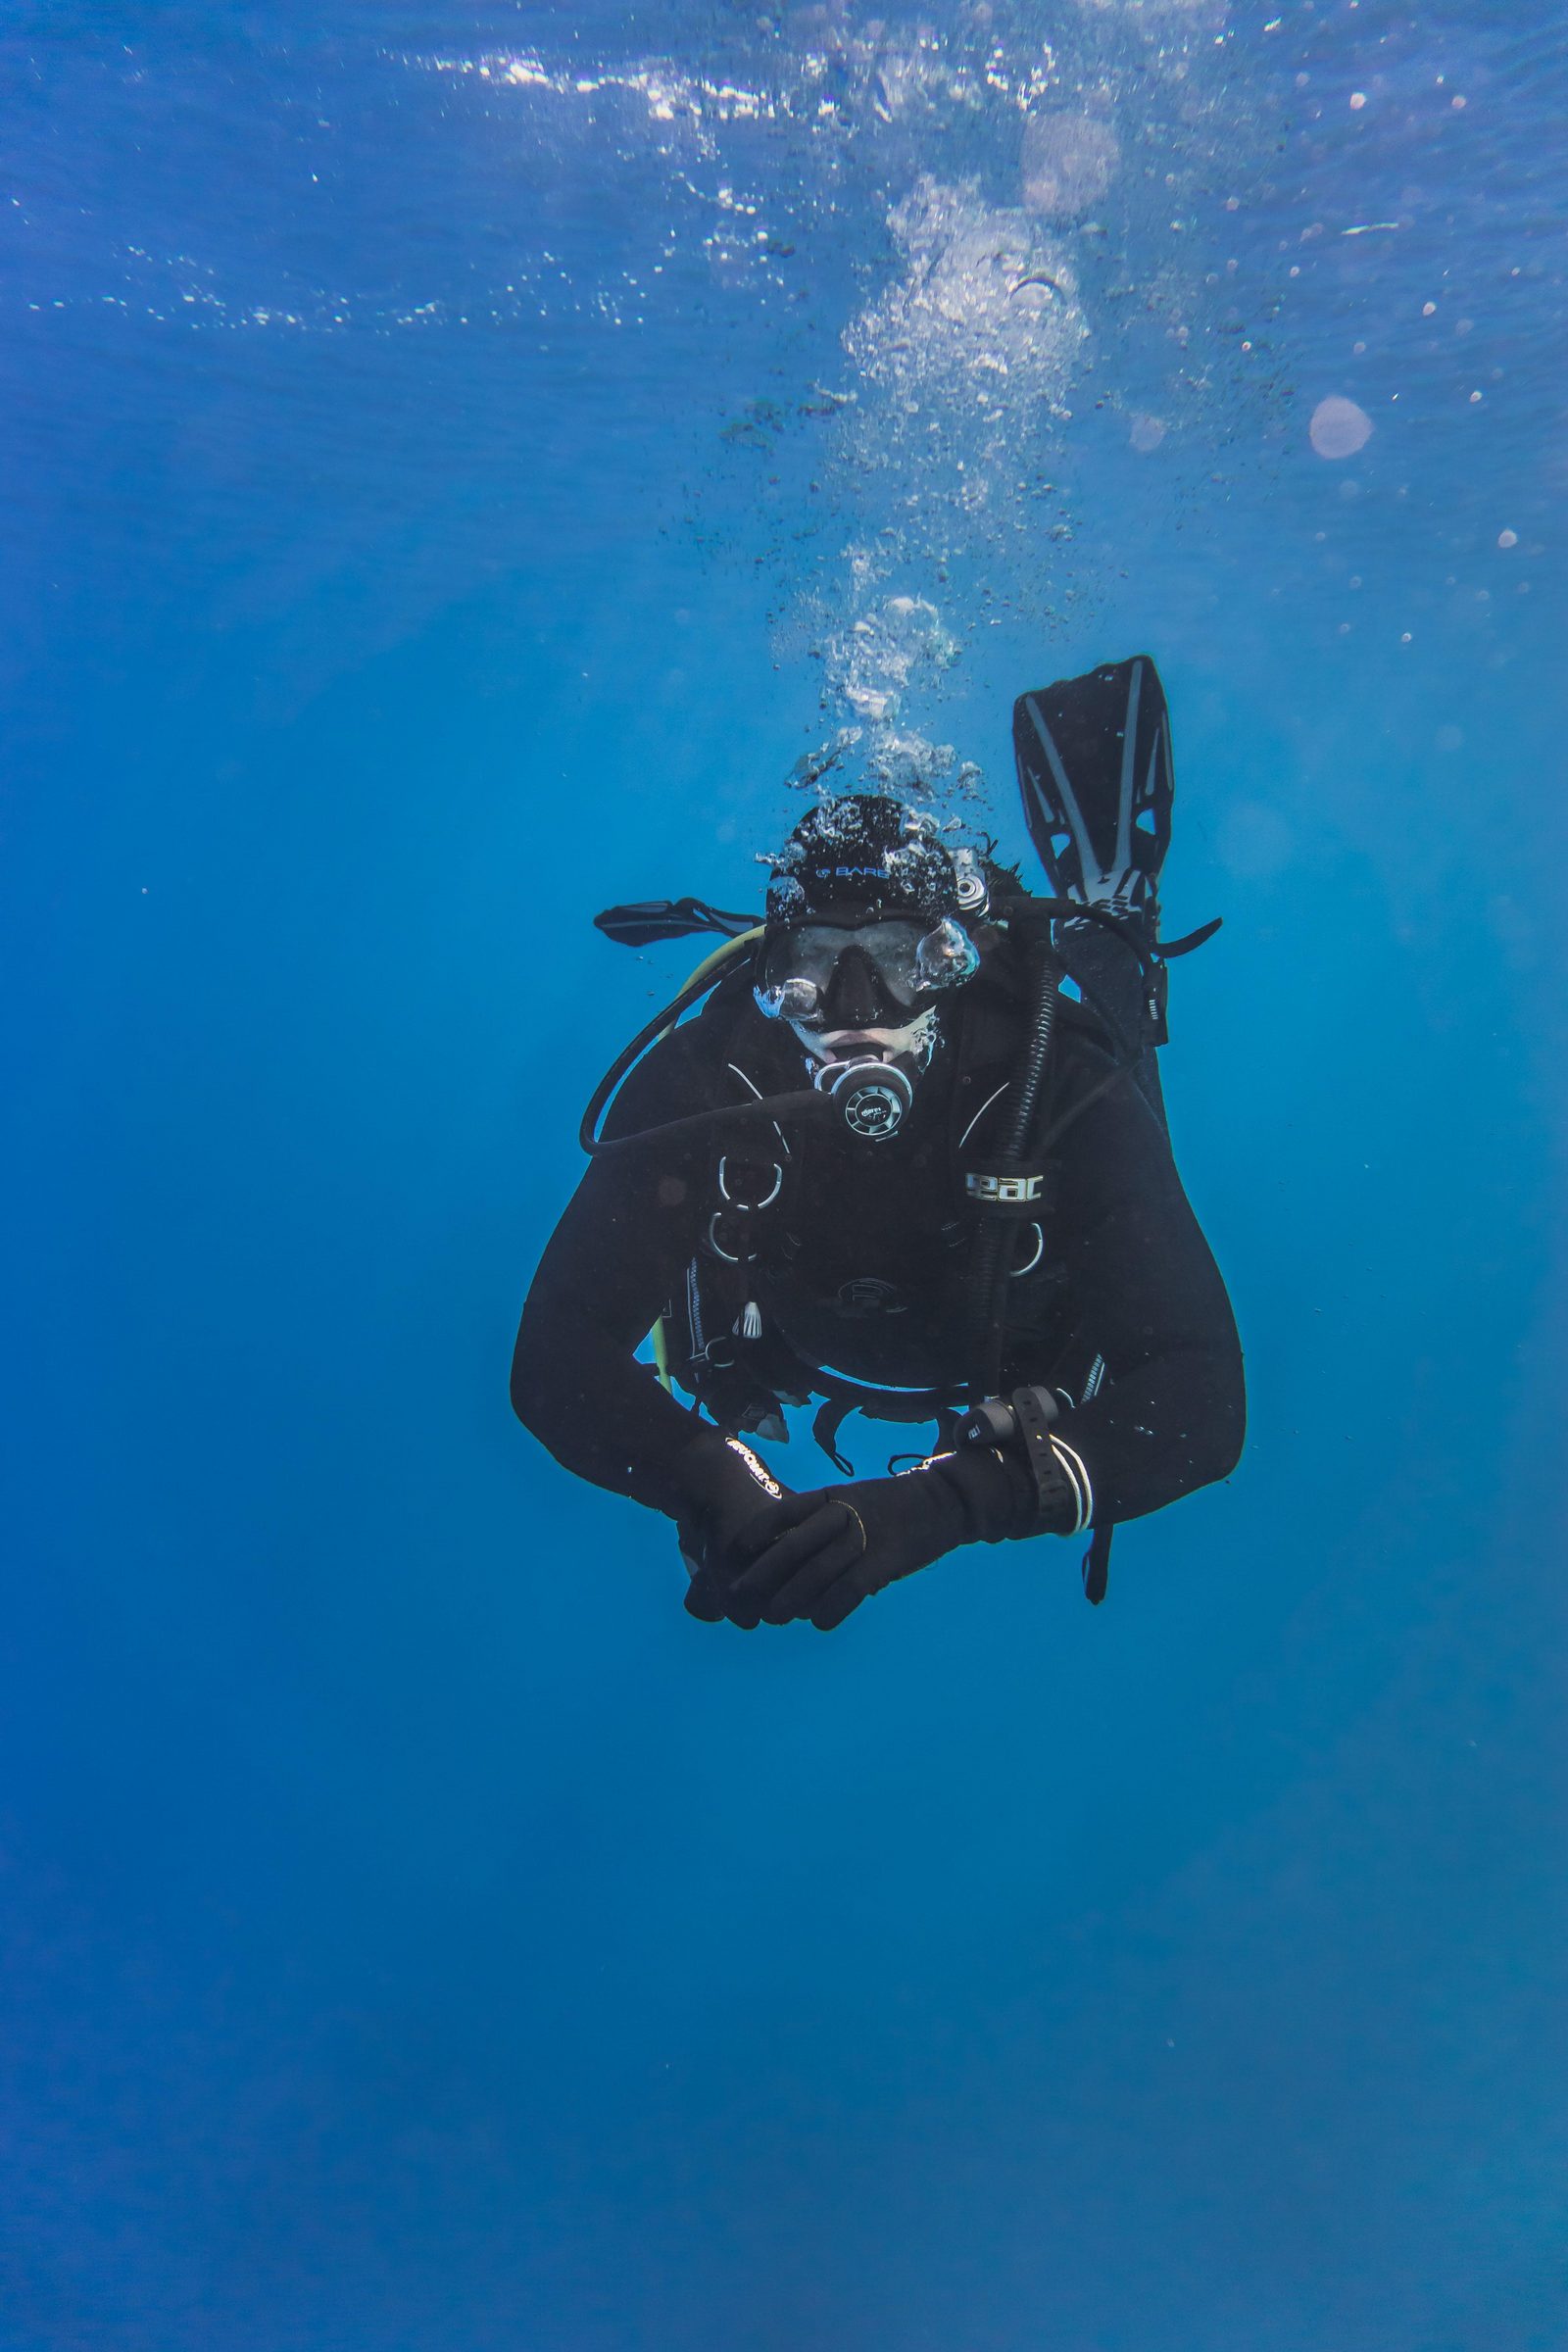 Read more about diving